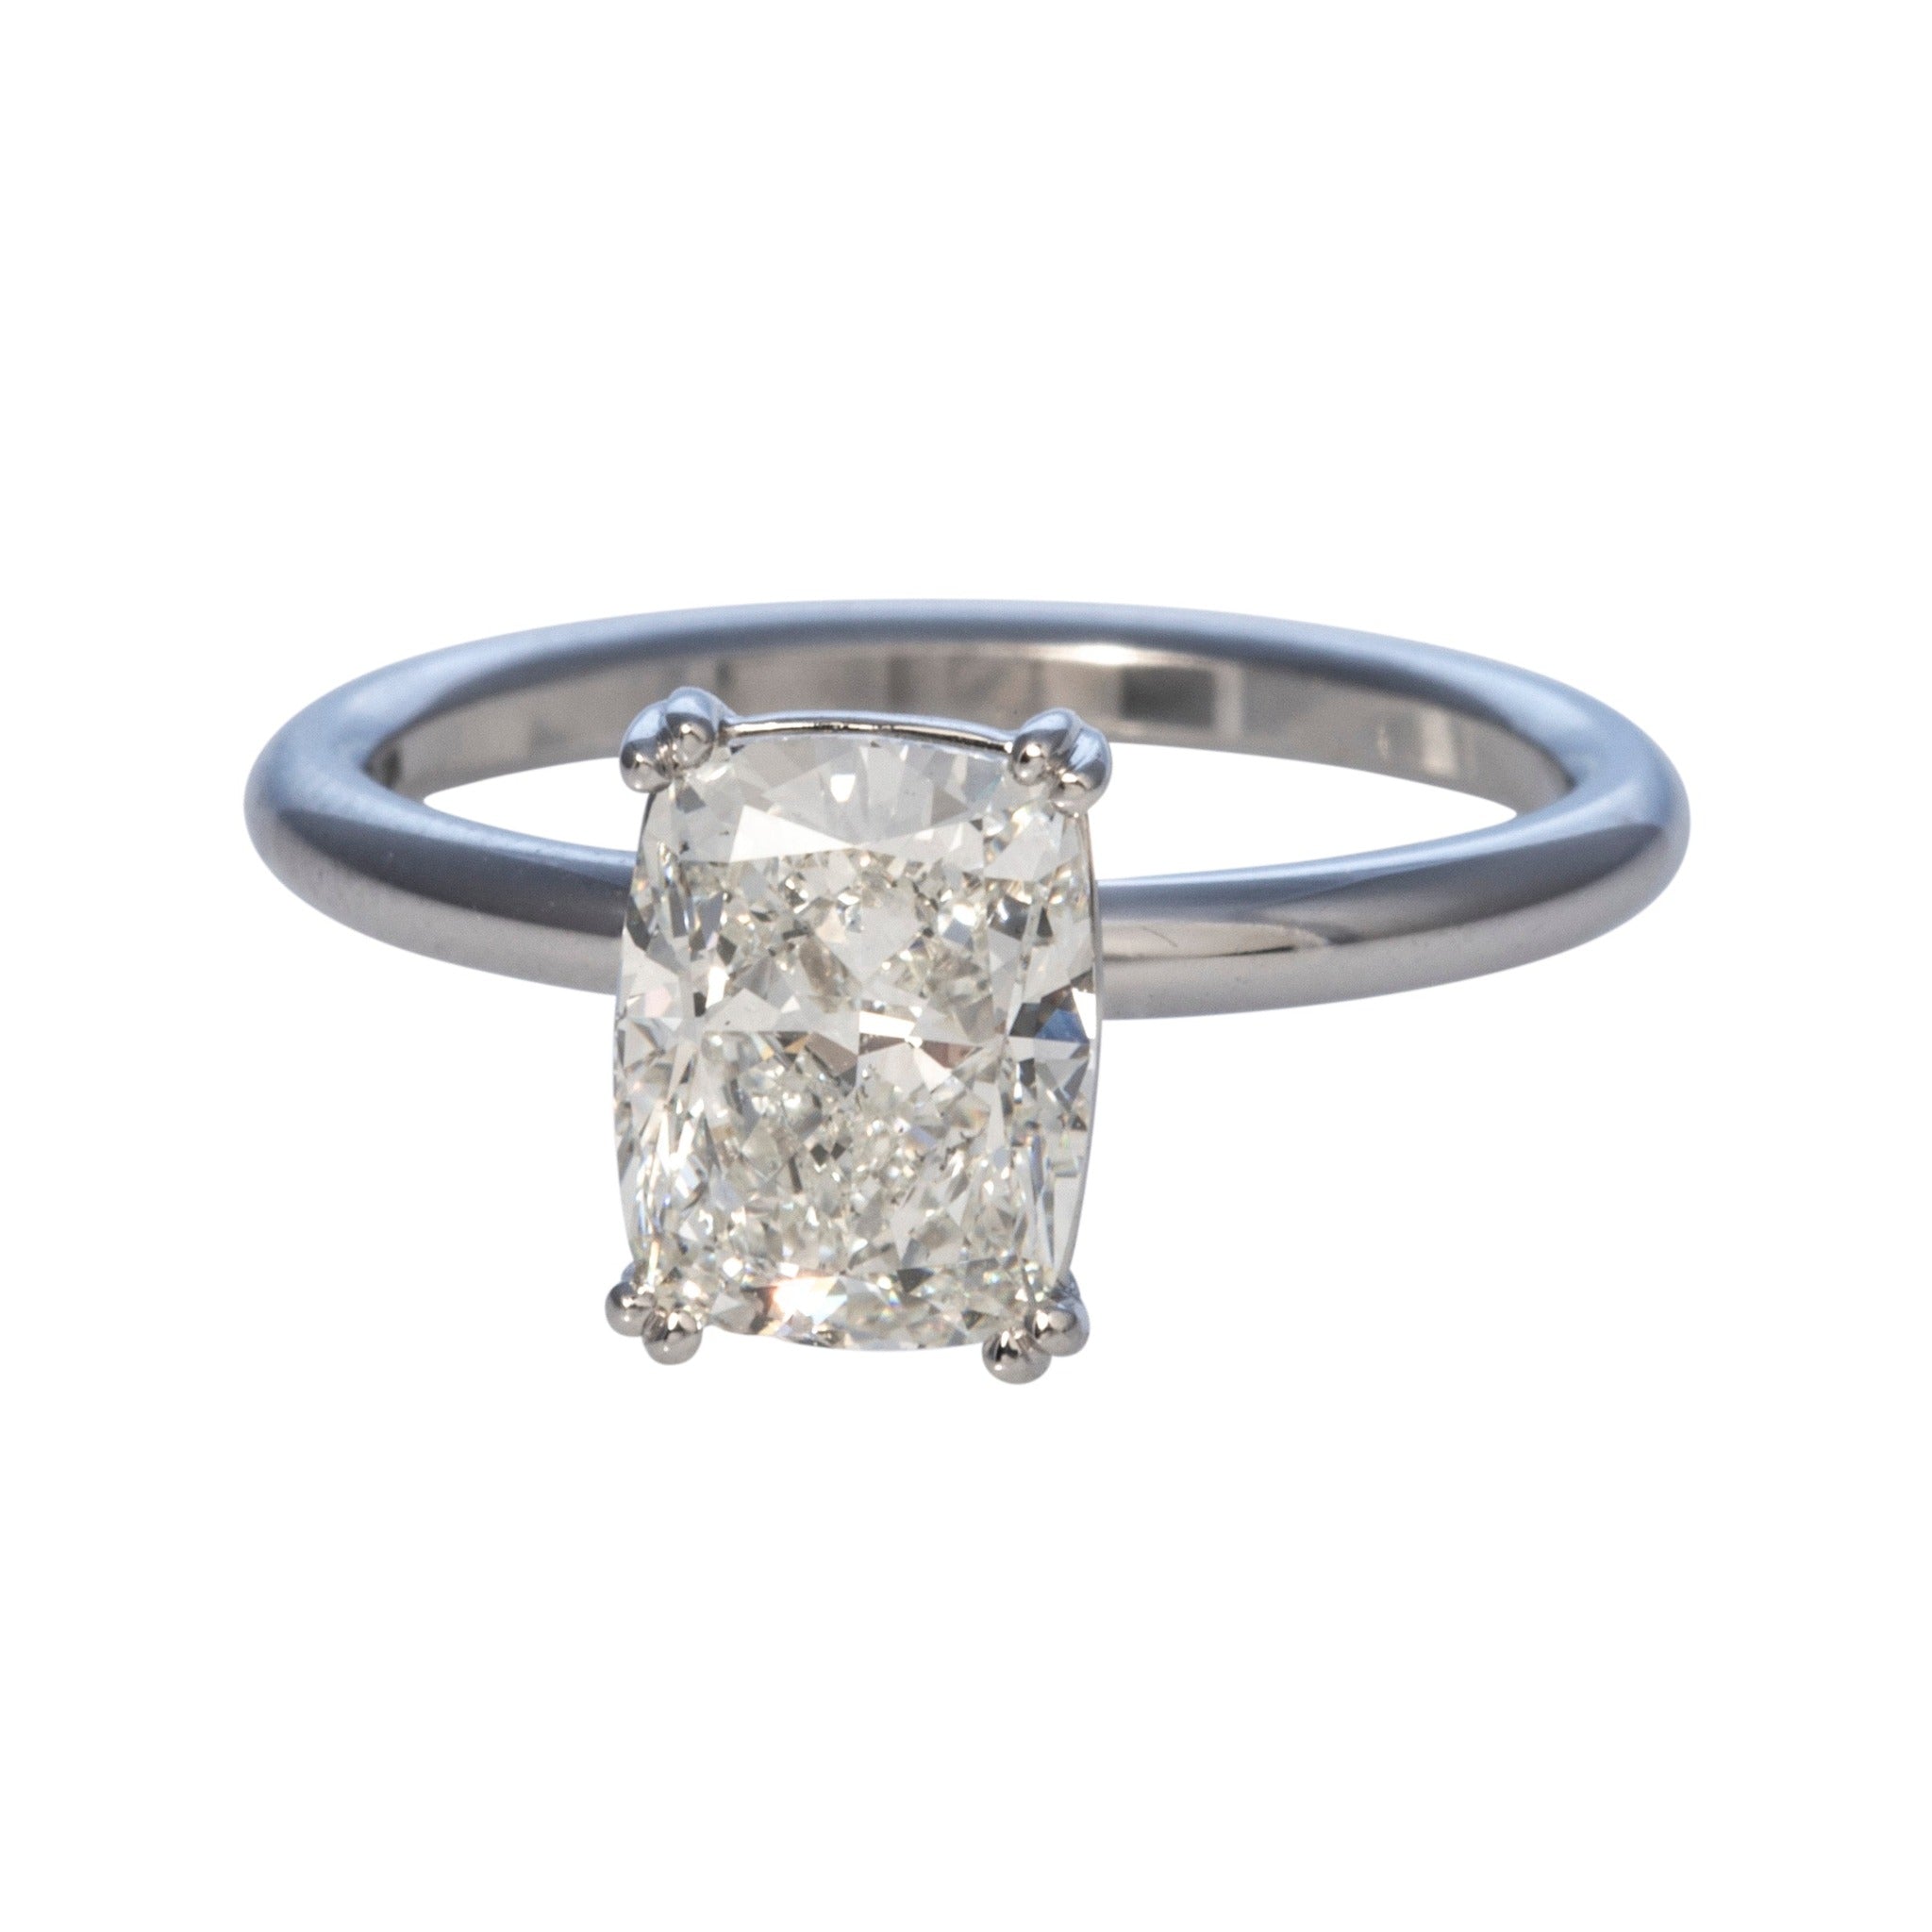 2ct Cushion Brilliant Diamond Solitaire 14K Gold Engagement Ring